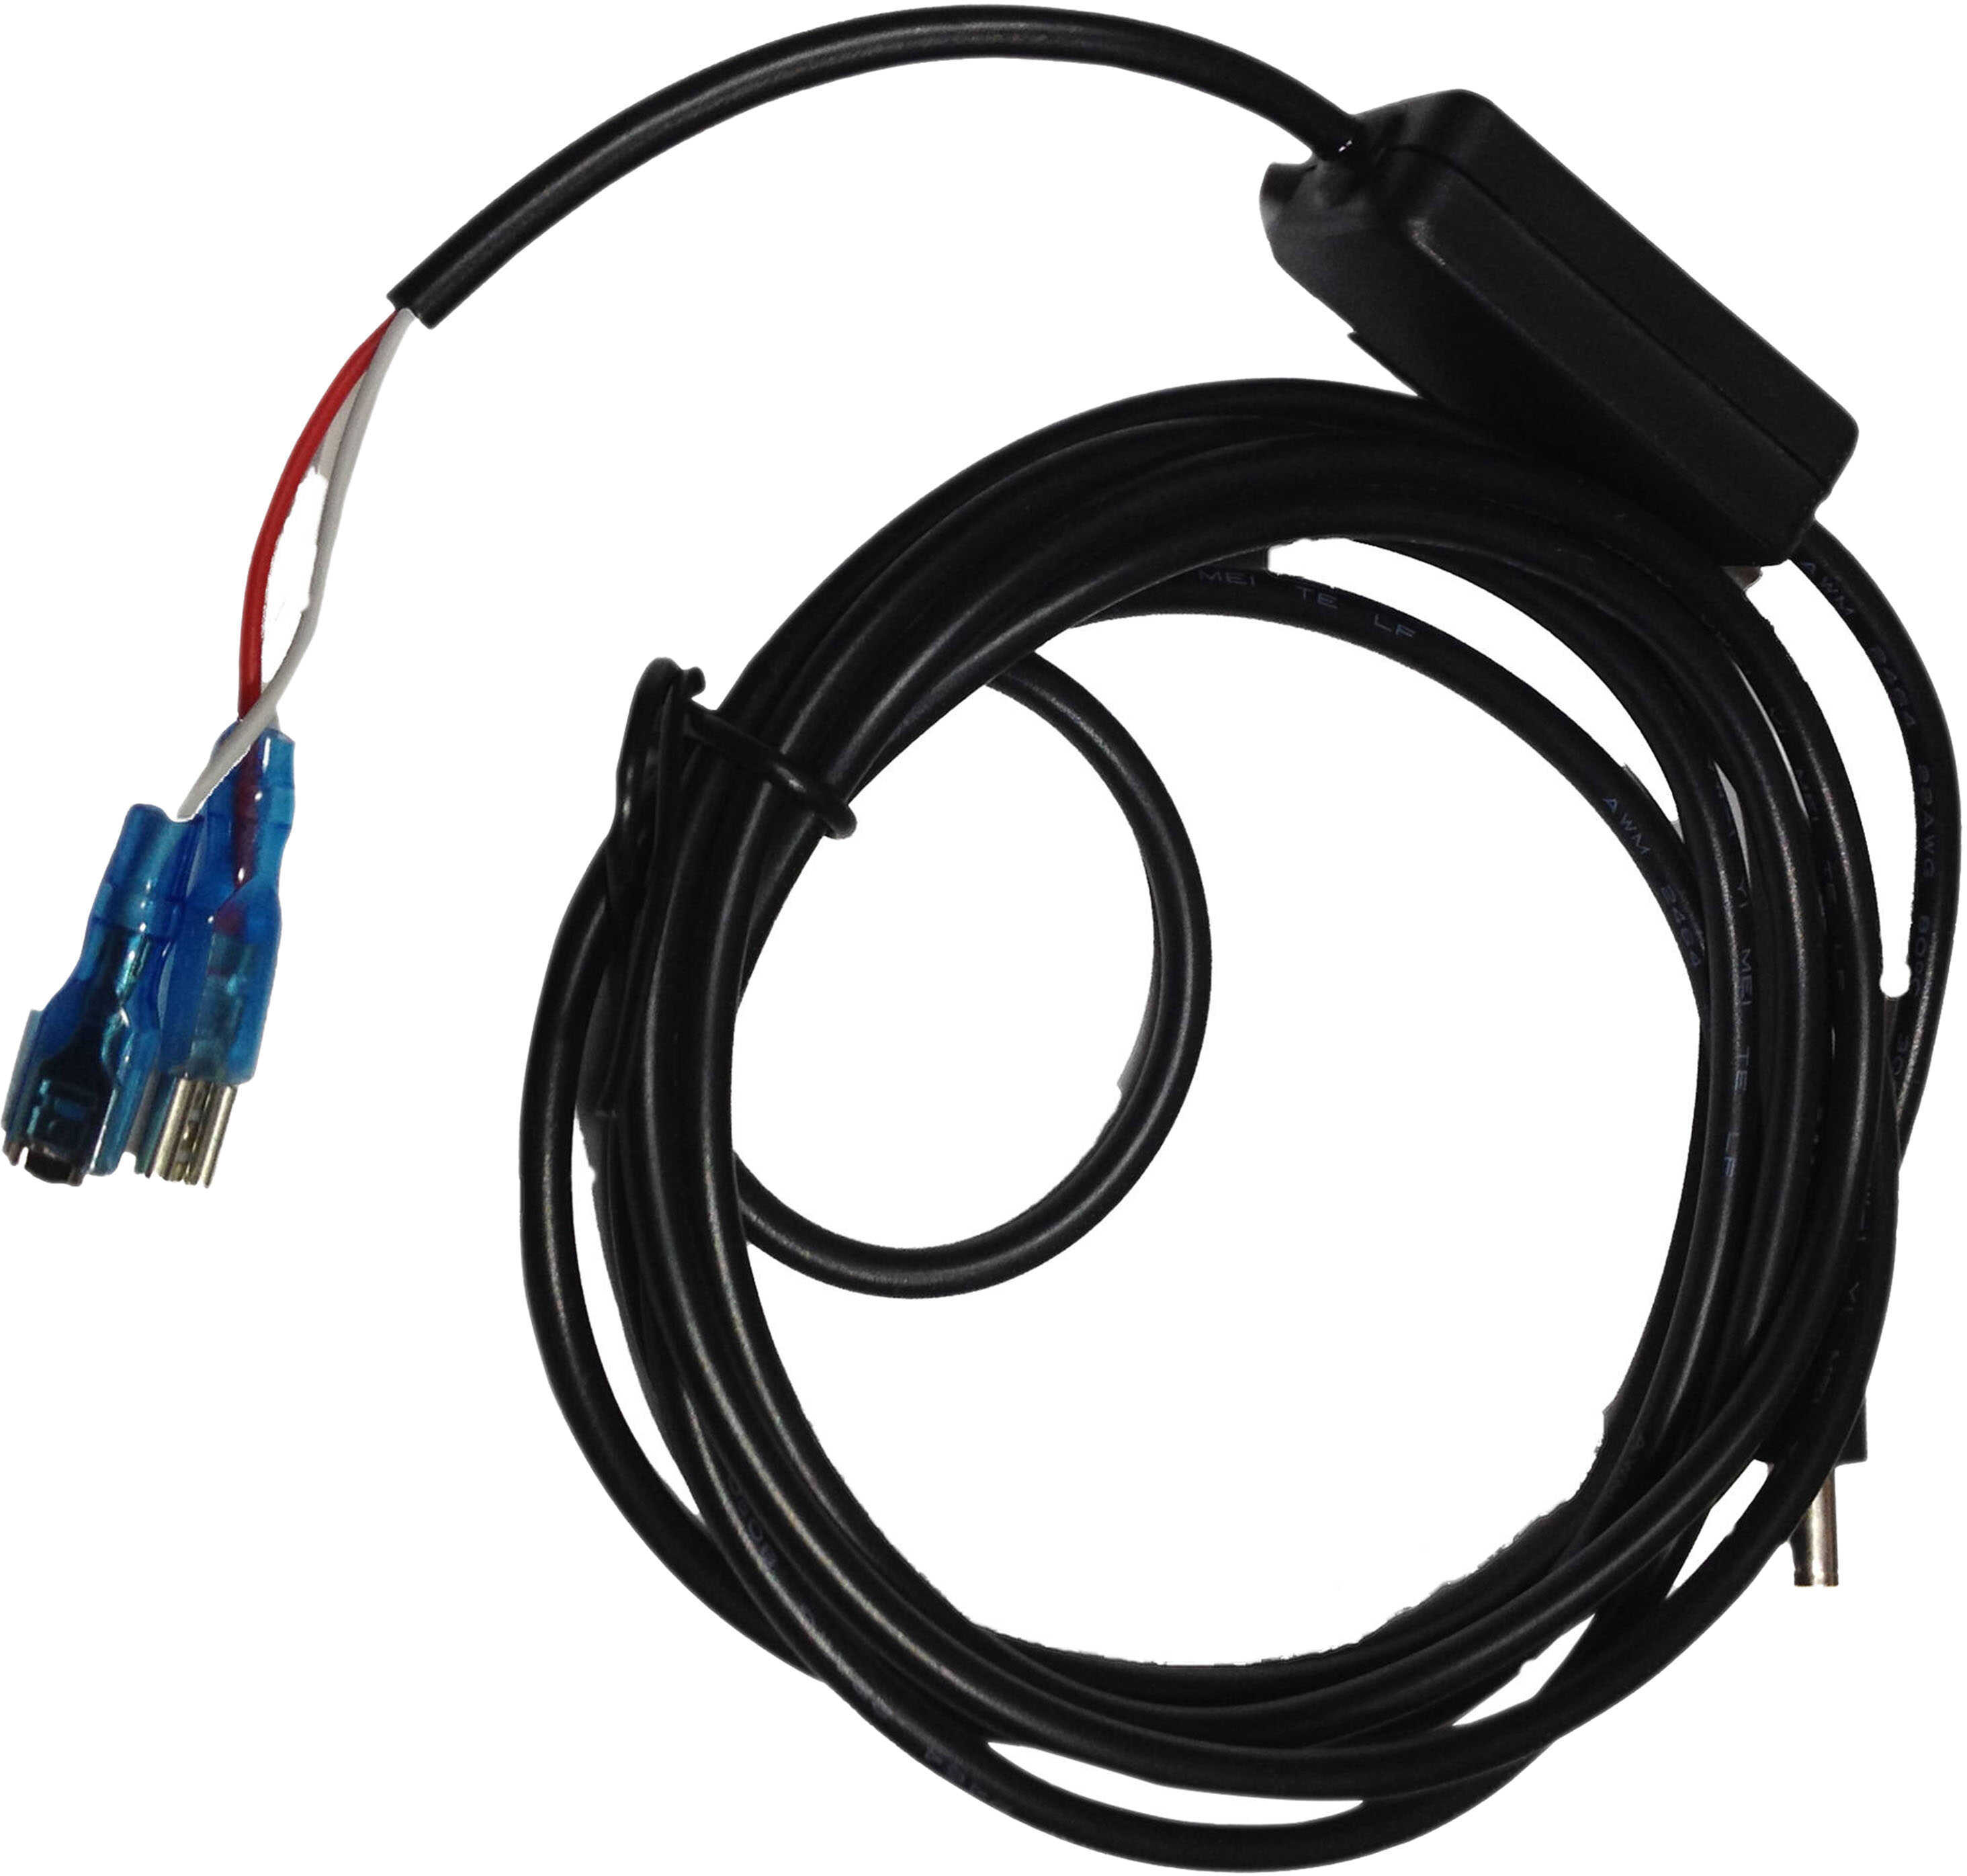 Covert Convertor Cable